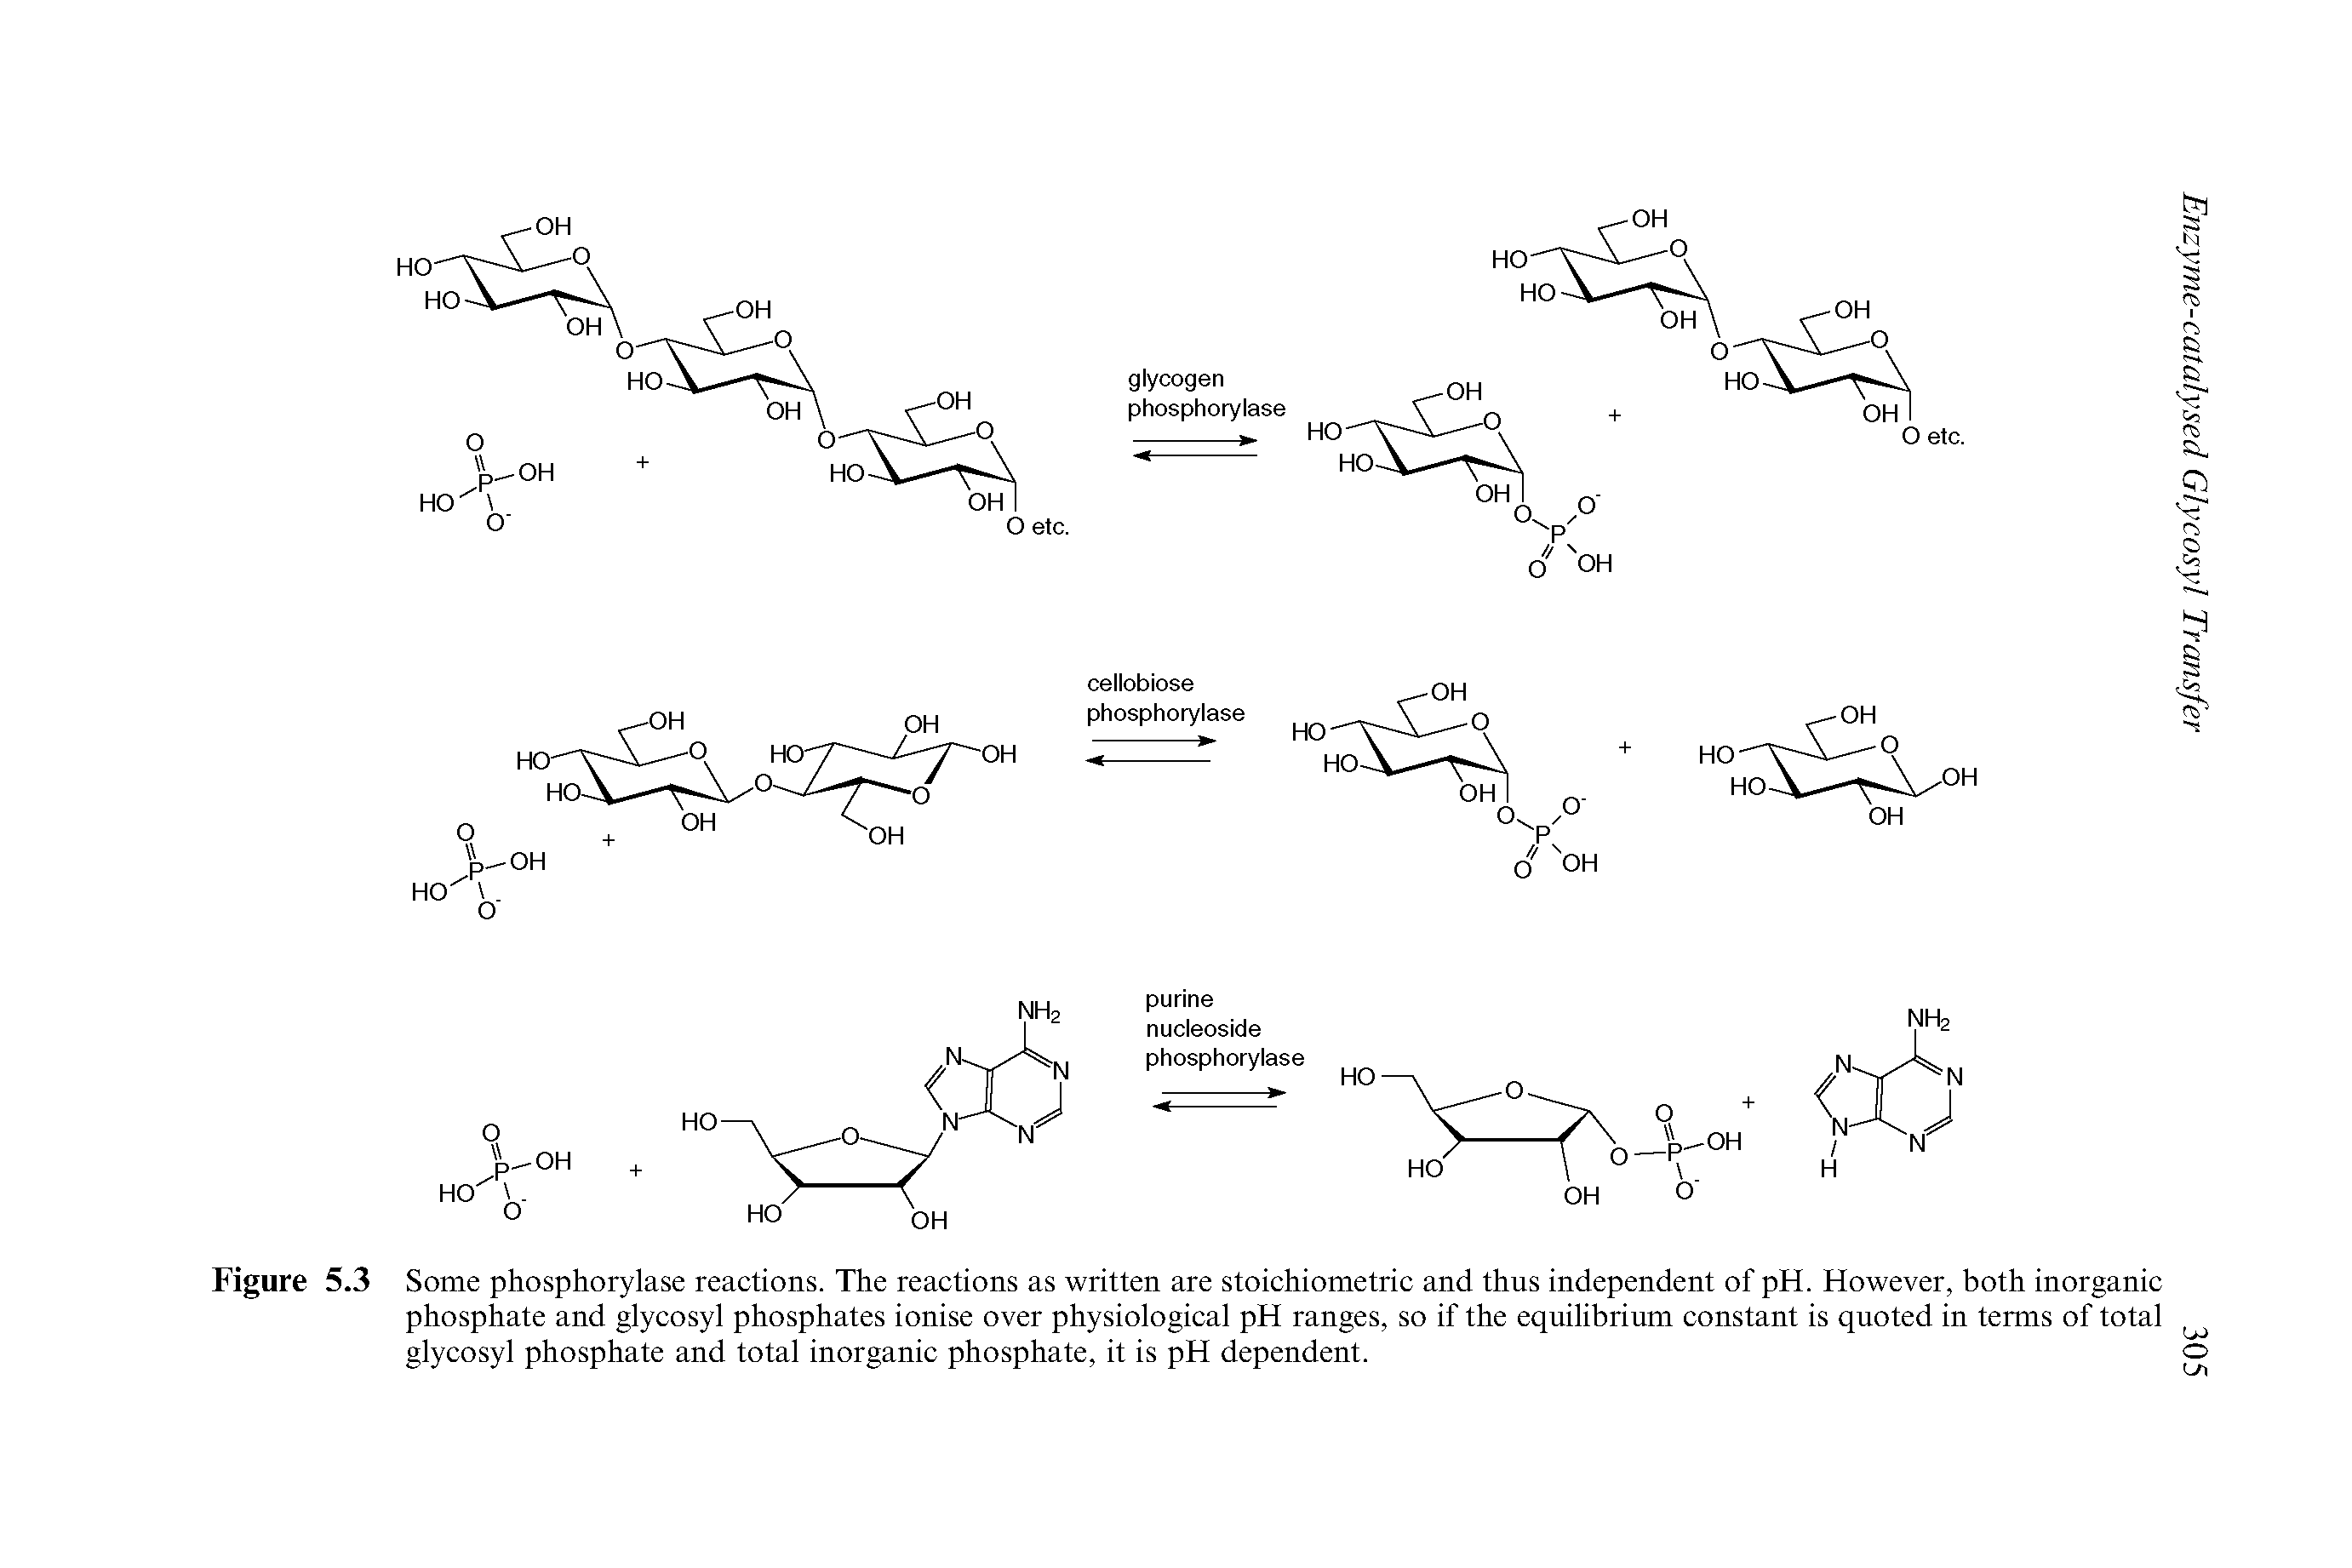 Figure 5.3 Some phosphorylase reactions. The reactions as written are stoichiometric and thus independent of pH. However, both inorganic phosphate and glycosyl phosphates ionise over physiological pH ranges, so if the equilibrium constant is quoted in terms of total glycosyl phosphate and total inorganic phosphate, it is pH dependent.